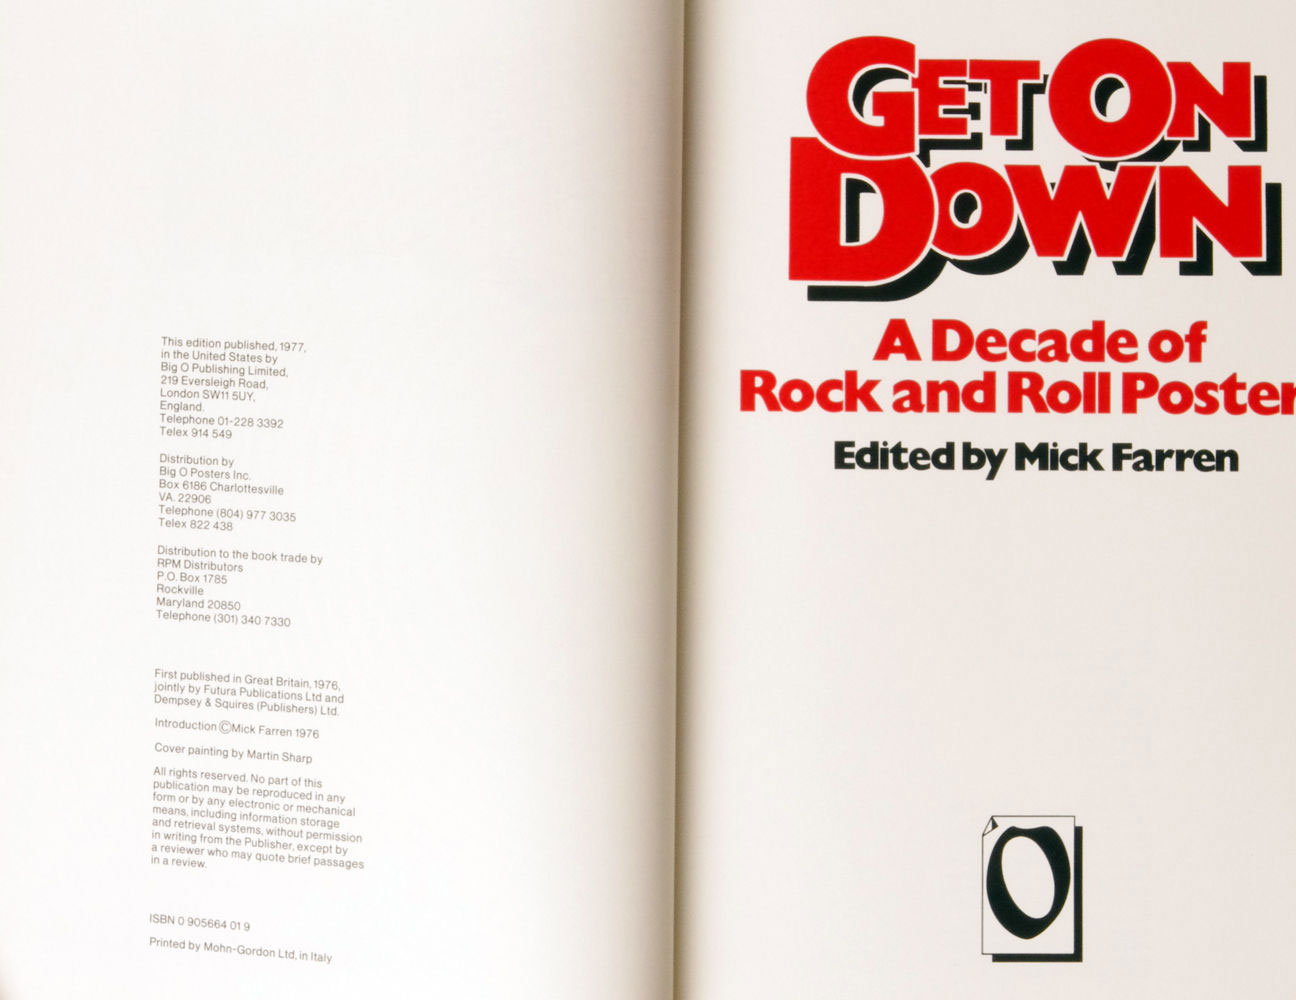 Rock and Roll Posters Book Get On Down 1977 First Edition 